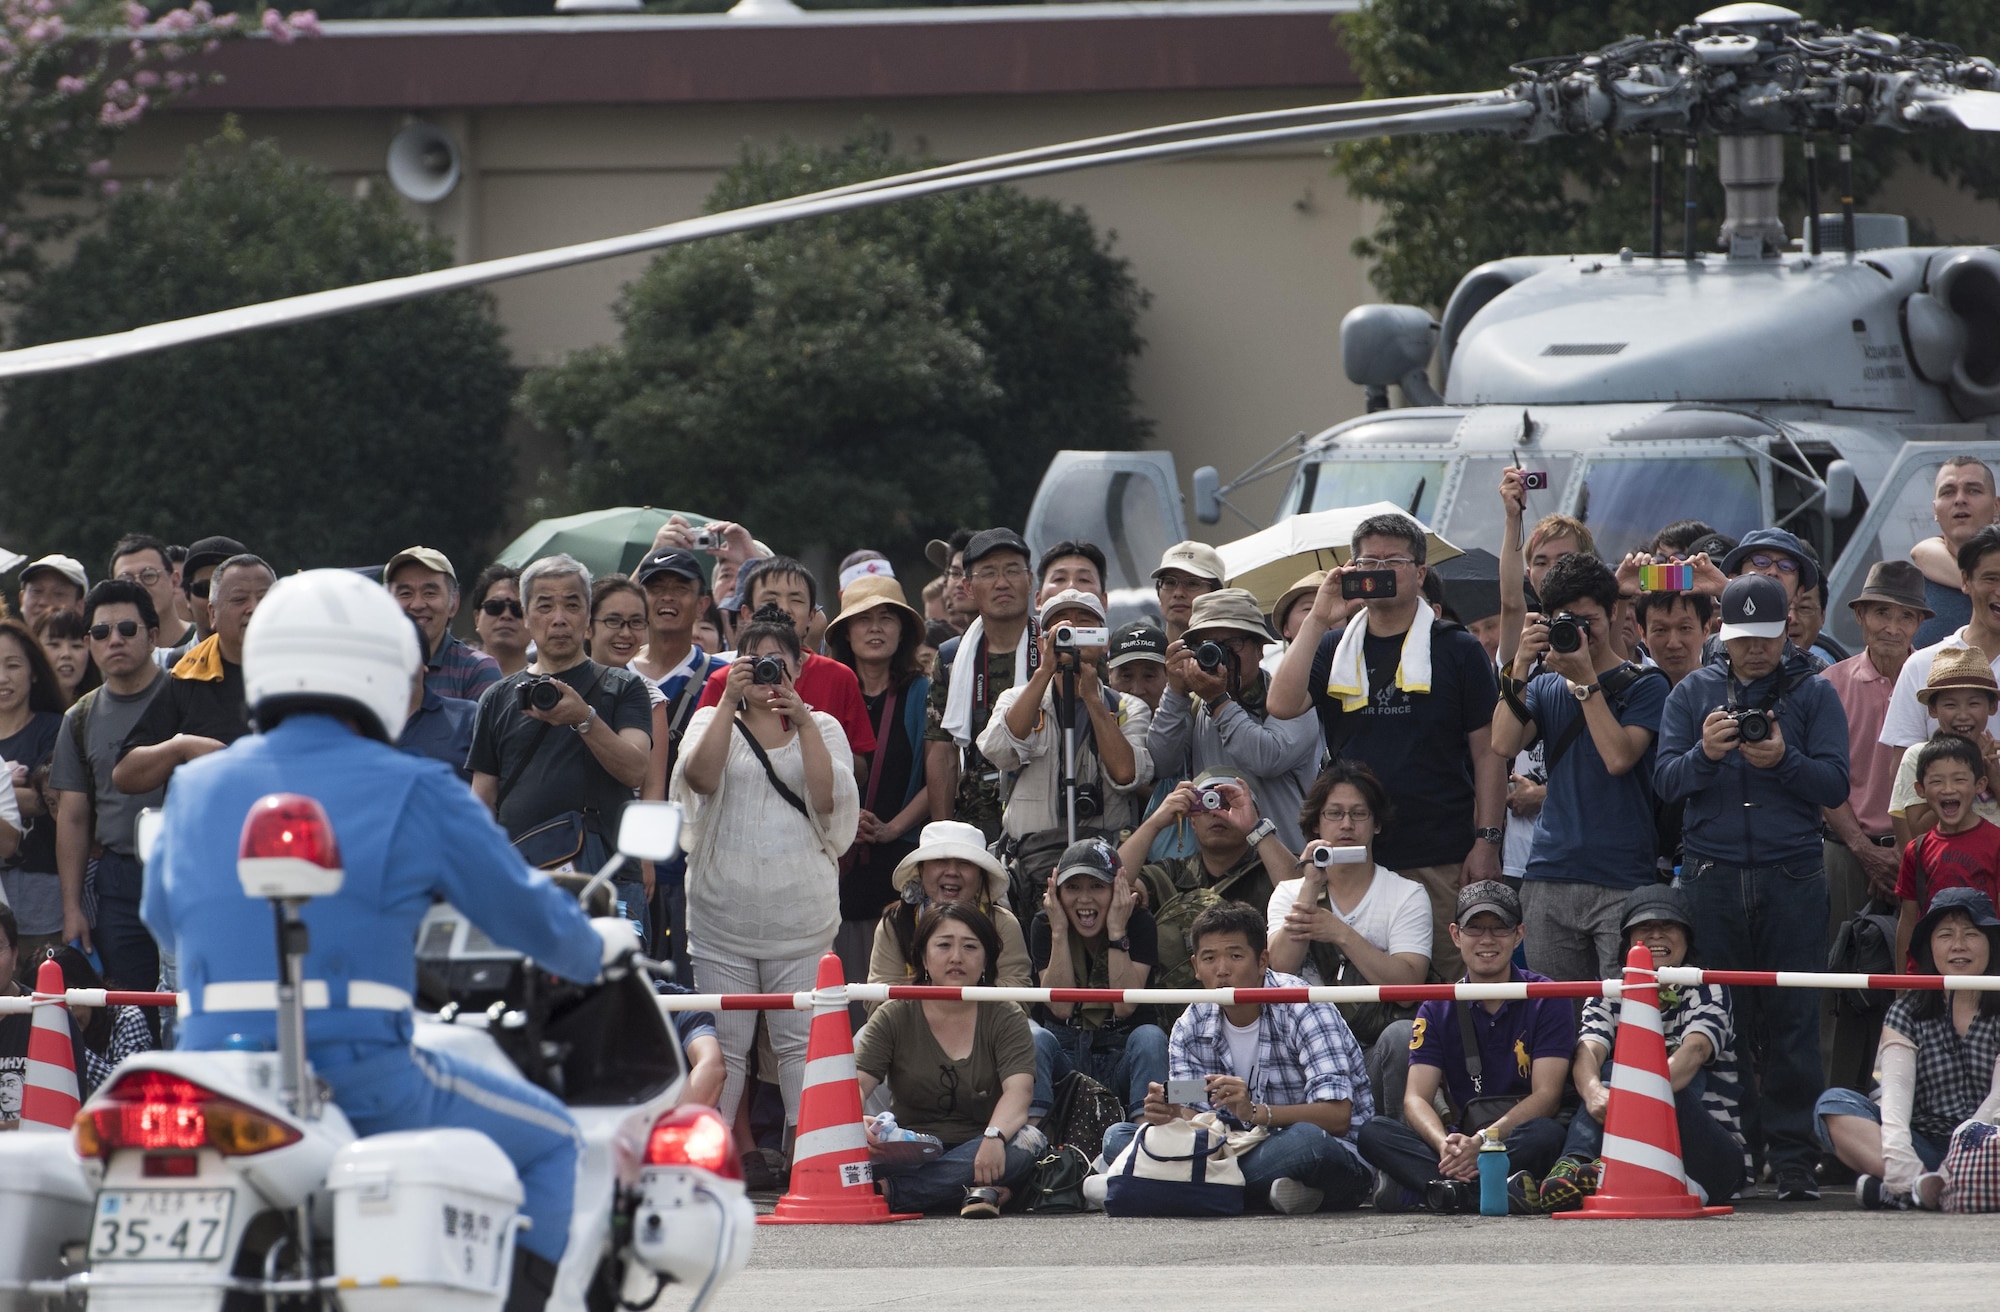 A crowd watches the Tokyo Metropolitan Police Department 9th District traffic mobile unit conduct their motorcycle demonstration during the 2016 Japanese-American Friendship Festival at Yokota Air Base, Japan, Sept. 17, 2016. The festival hosted food vendors, static aircraft displays, live entertainment and military and government demonstrations. (U.S. Air Force photo by Staff Sgt. Cody H. Ramirez/Released)